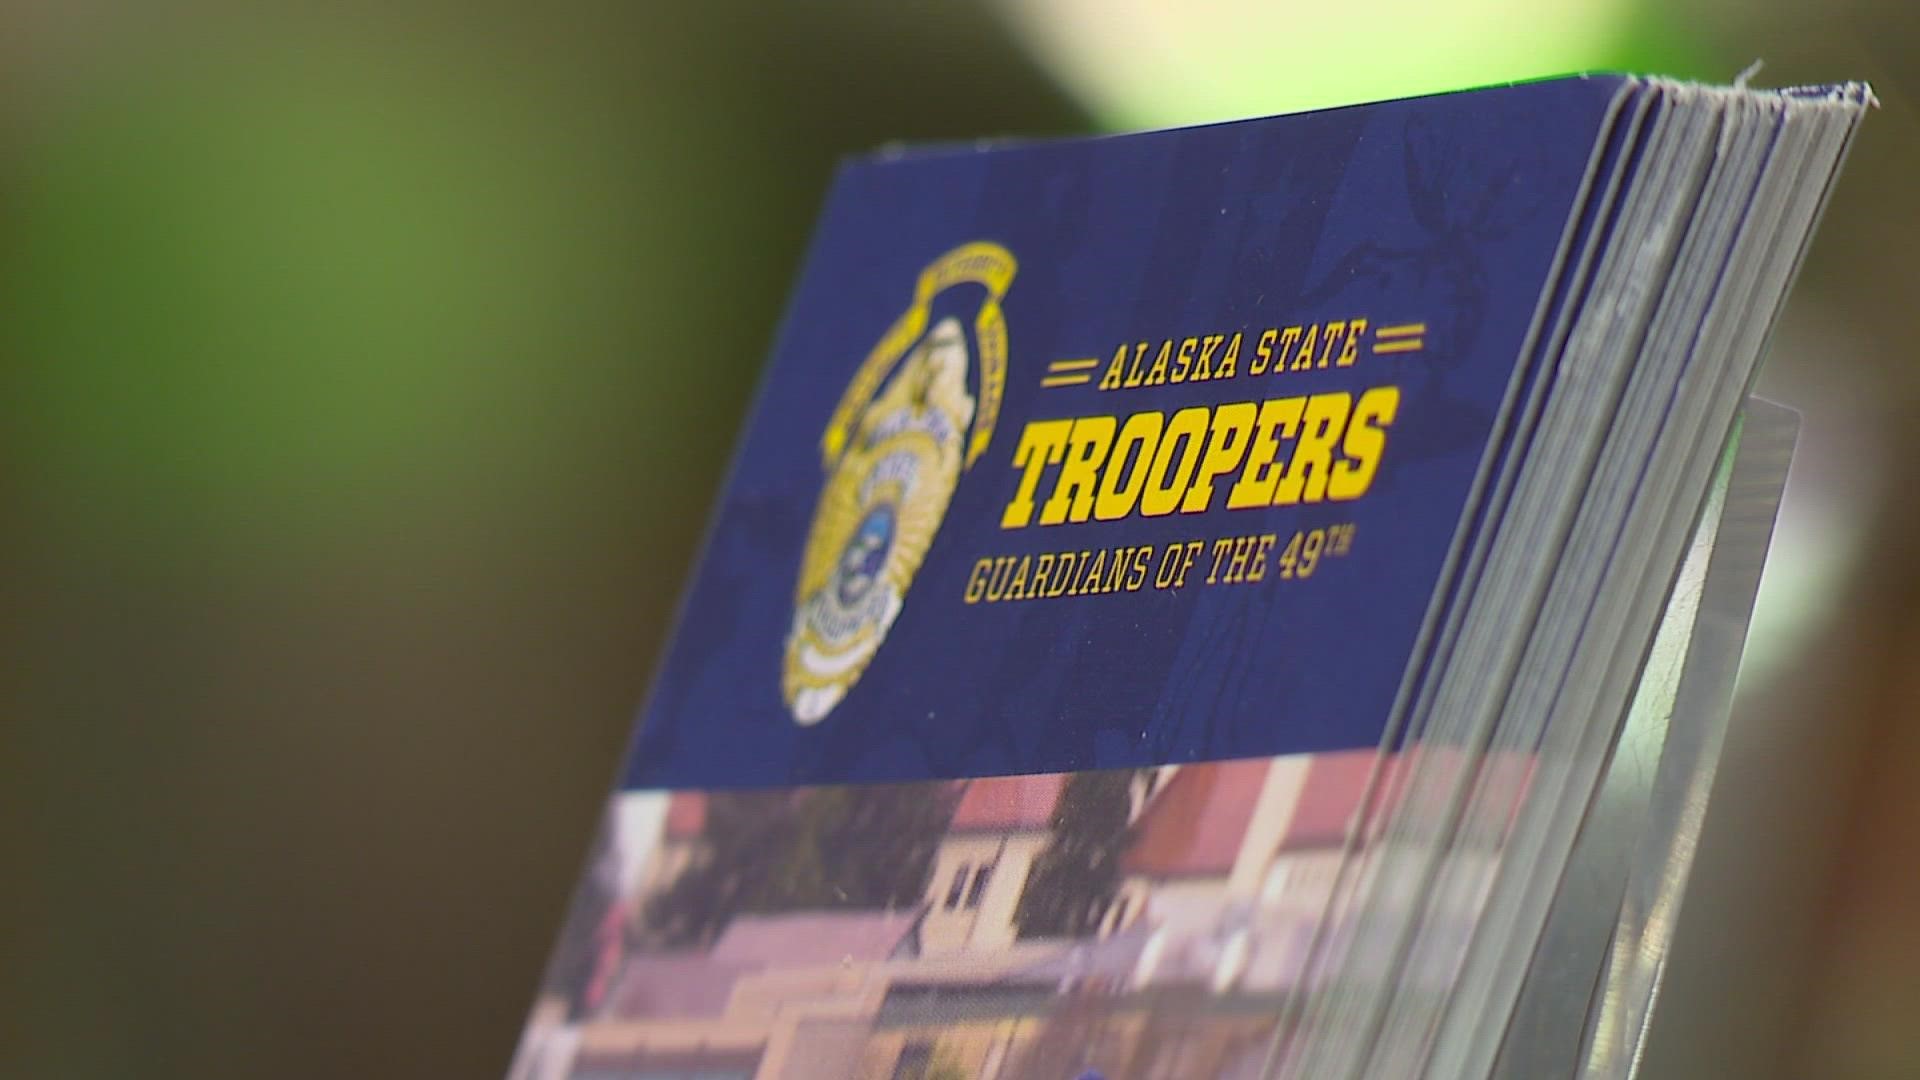 Alaska State Troopers are looking to hire law enforcement officers who may have left their jobs due to Washington's vaccine mandate.